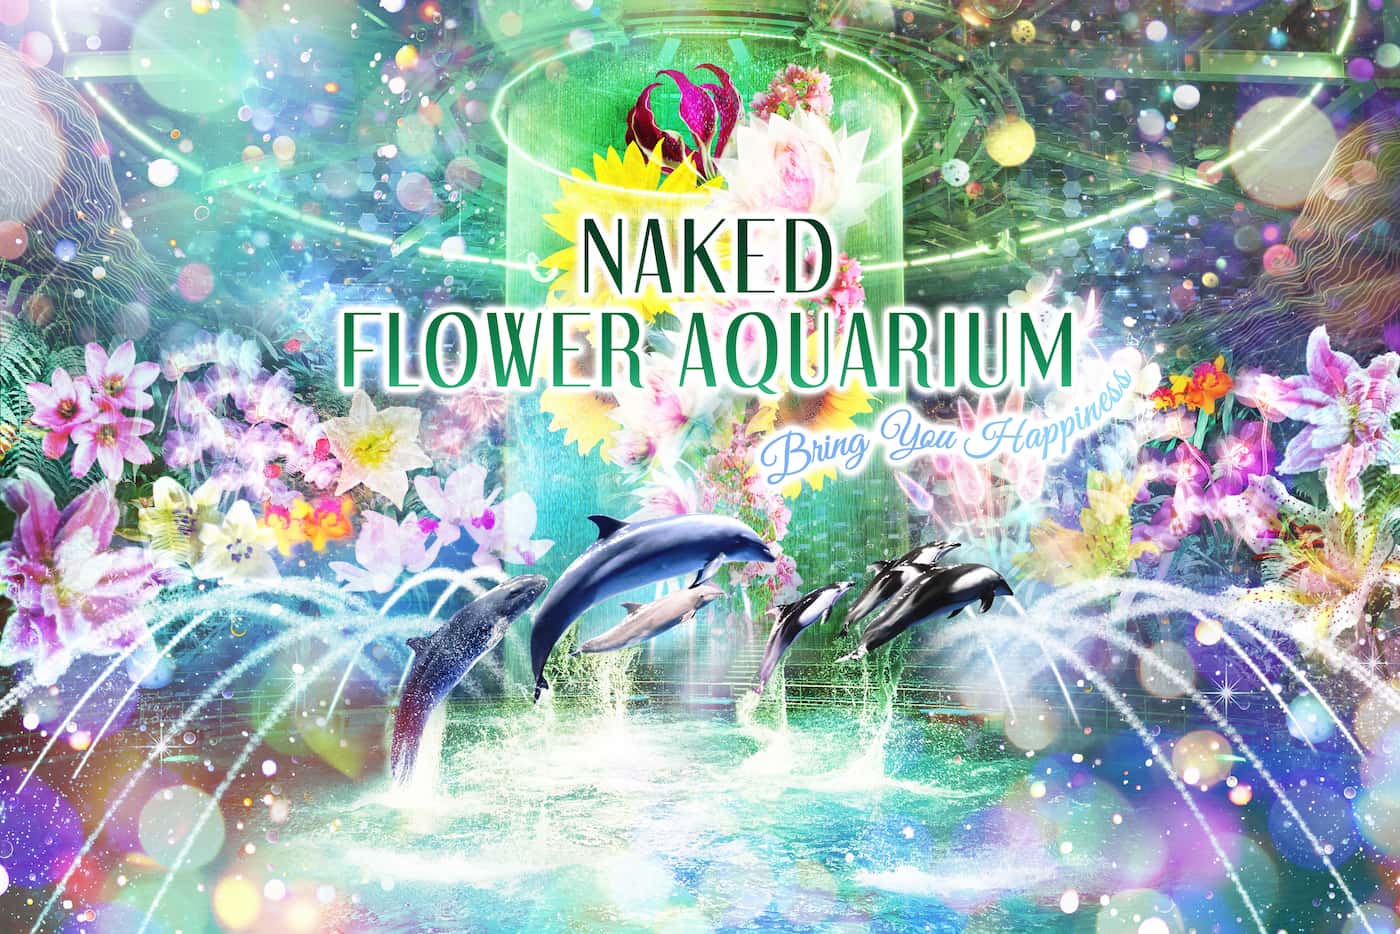 NAKED FLOWER AQUARIUM -Bring You Happiness